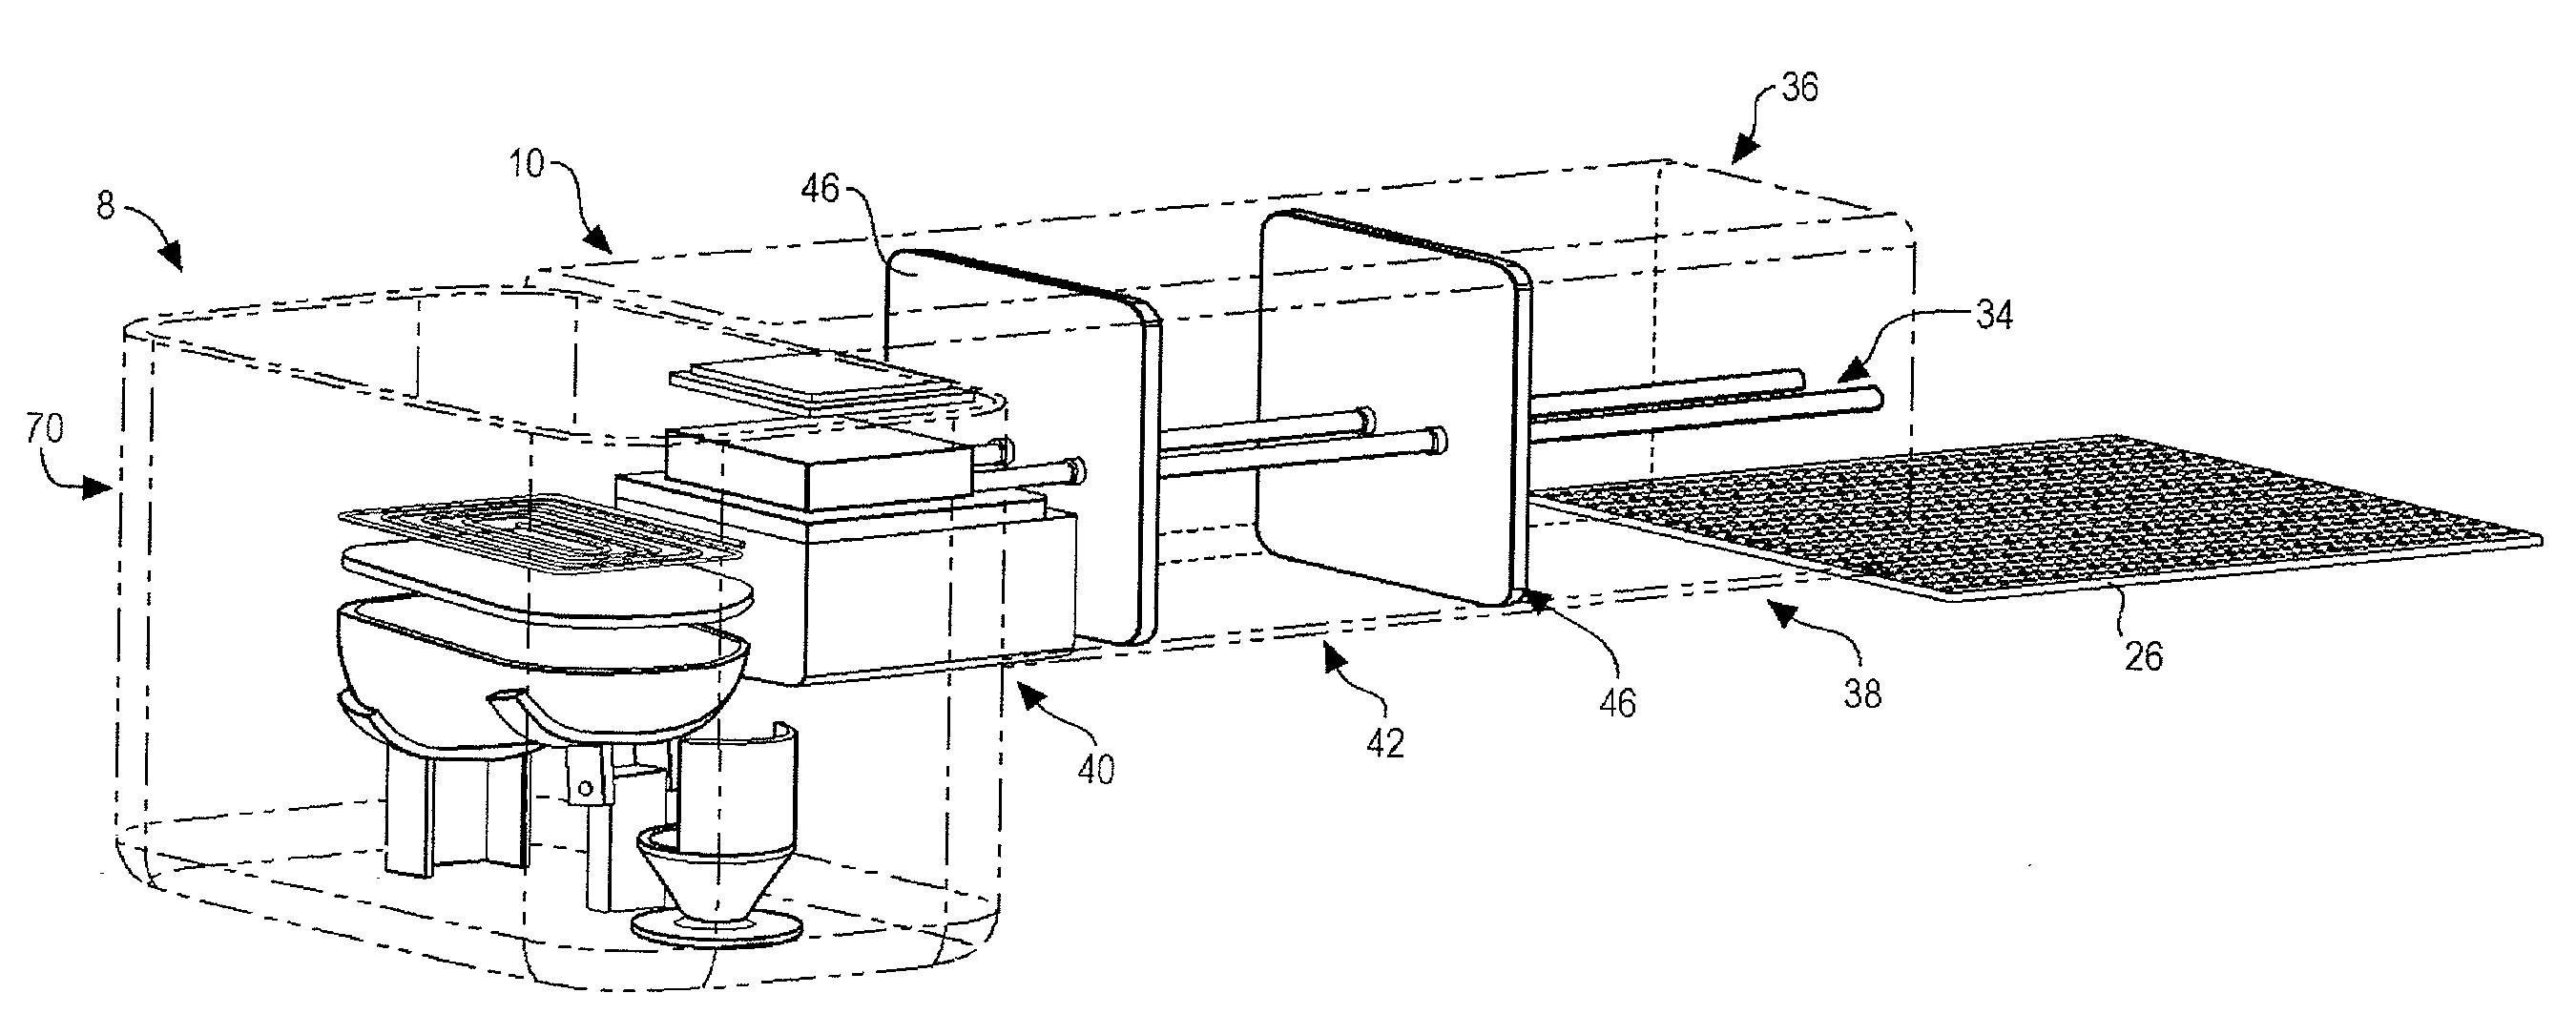 Apparatus and method of use for casting system with independent melting and solidification